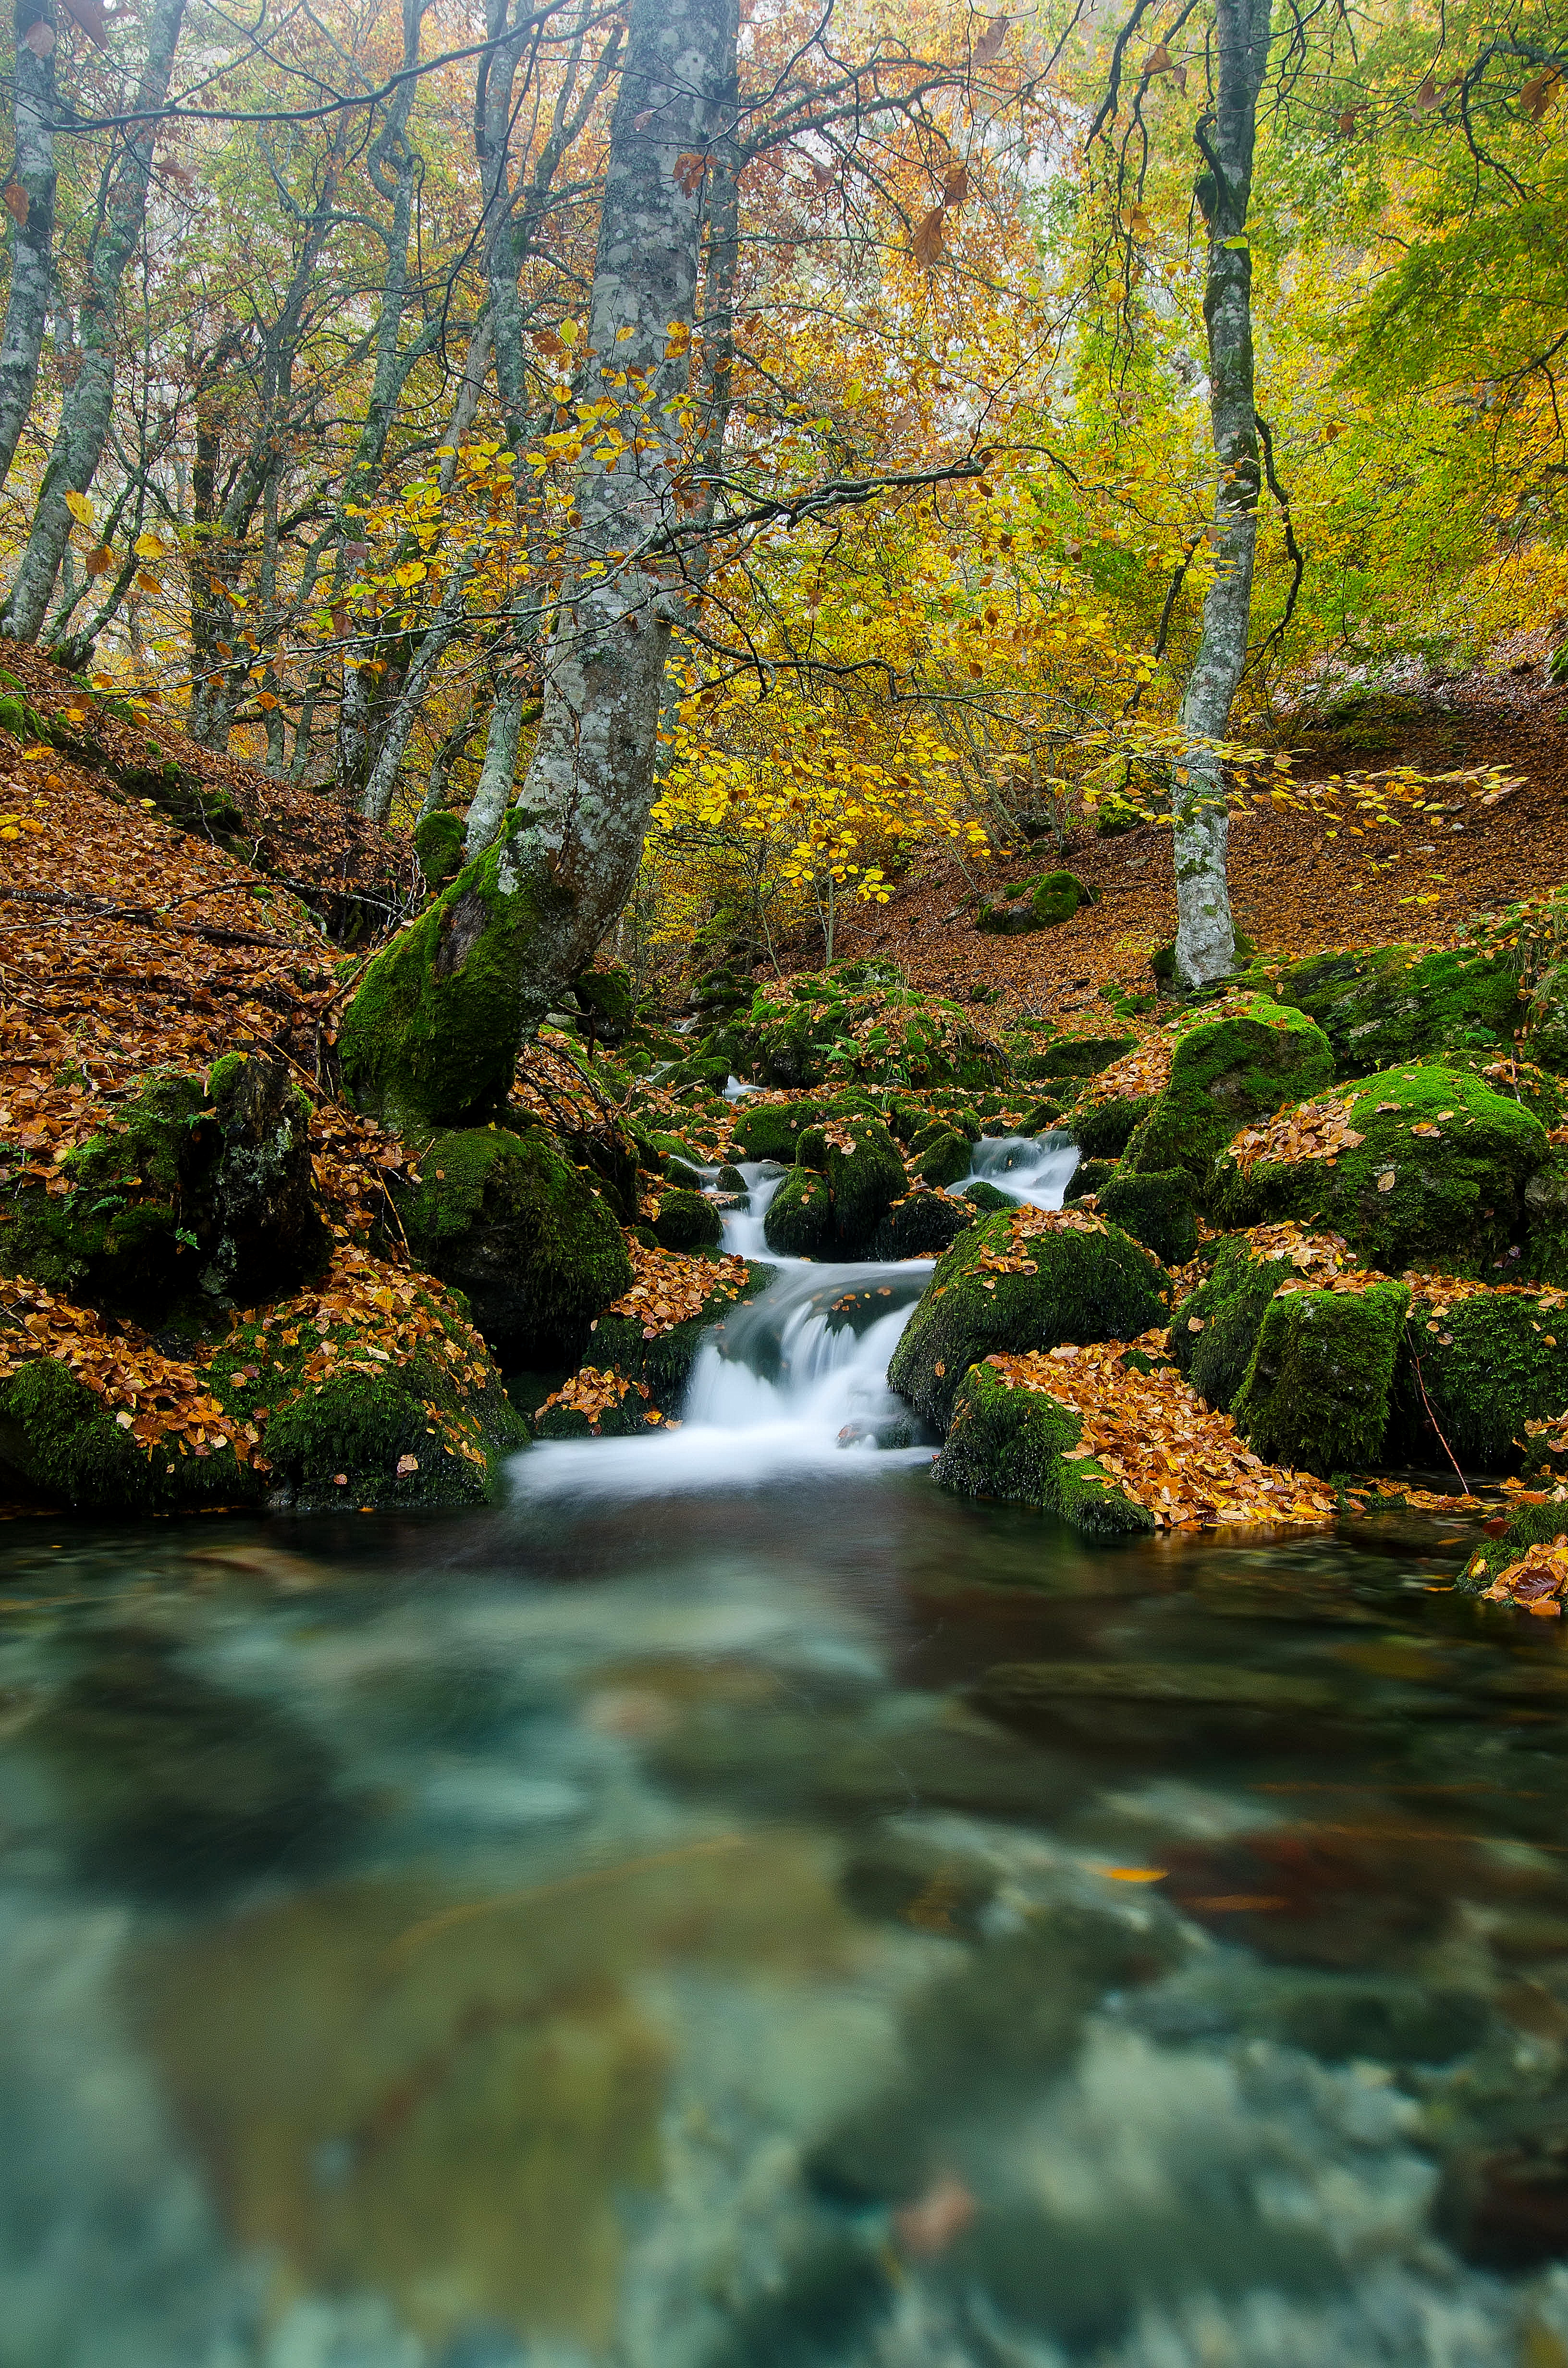 Wallpapers landscape nature autumn waterfall on the desktop